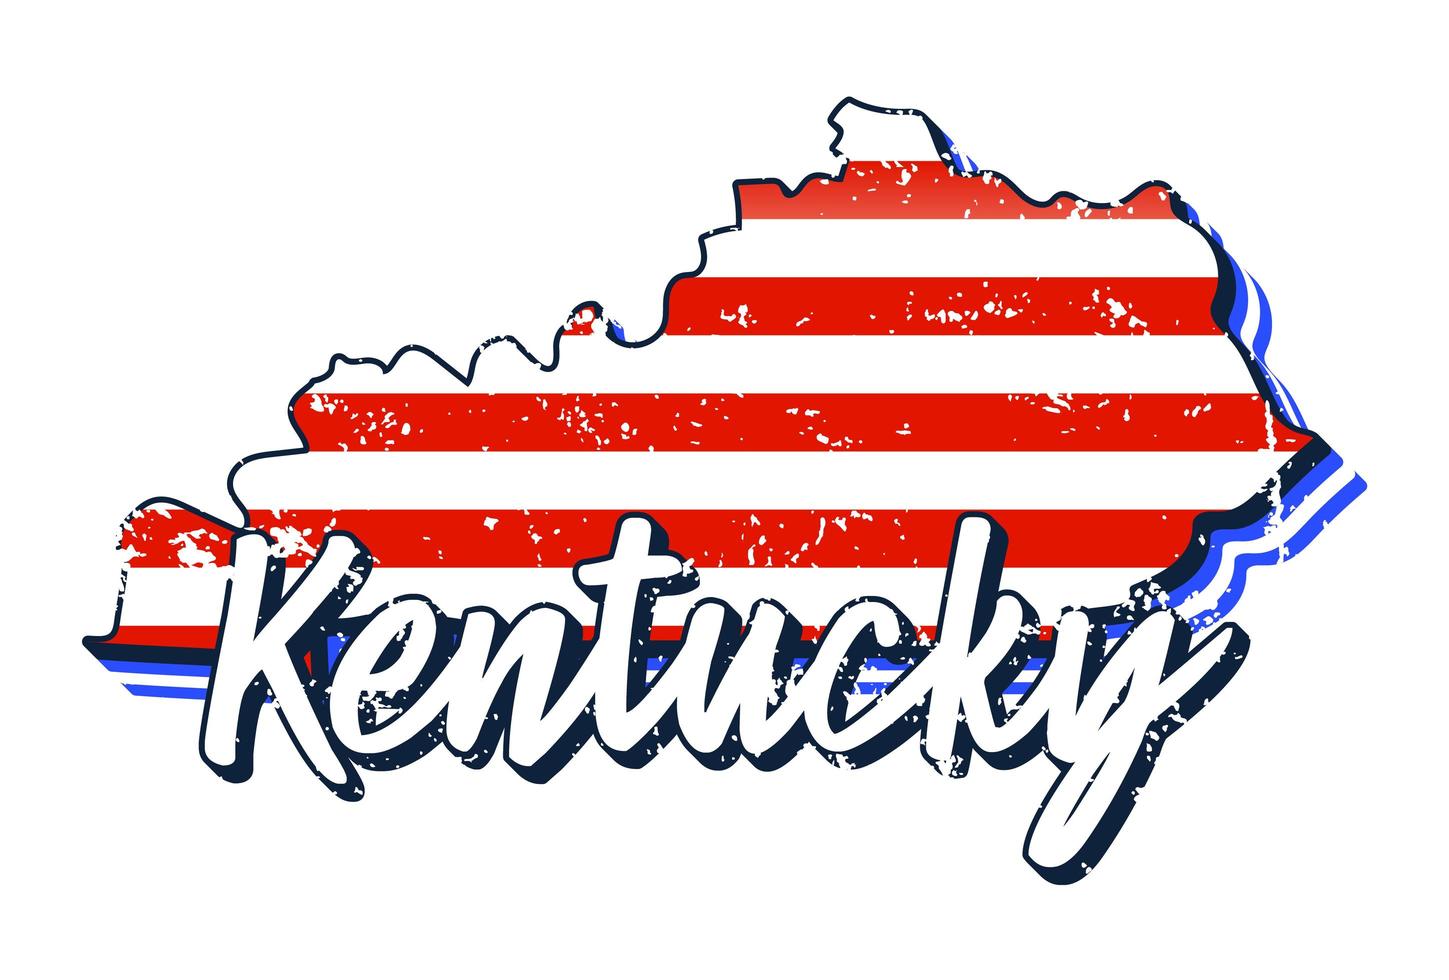 American Flag in Kentucky State Map. Vector Grunge Style With Typography Hand Drawn Lettering Kentucky on Map Shaped Old Grunge Vintage American National Flag Isolated on White Background